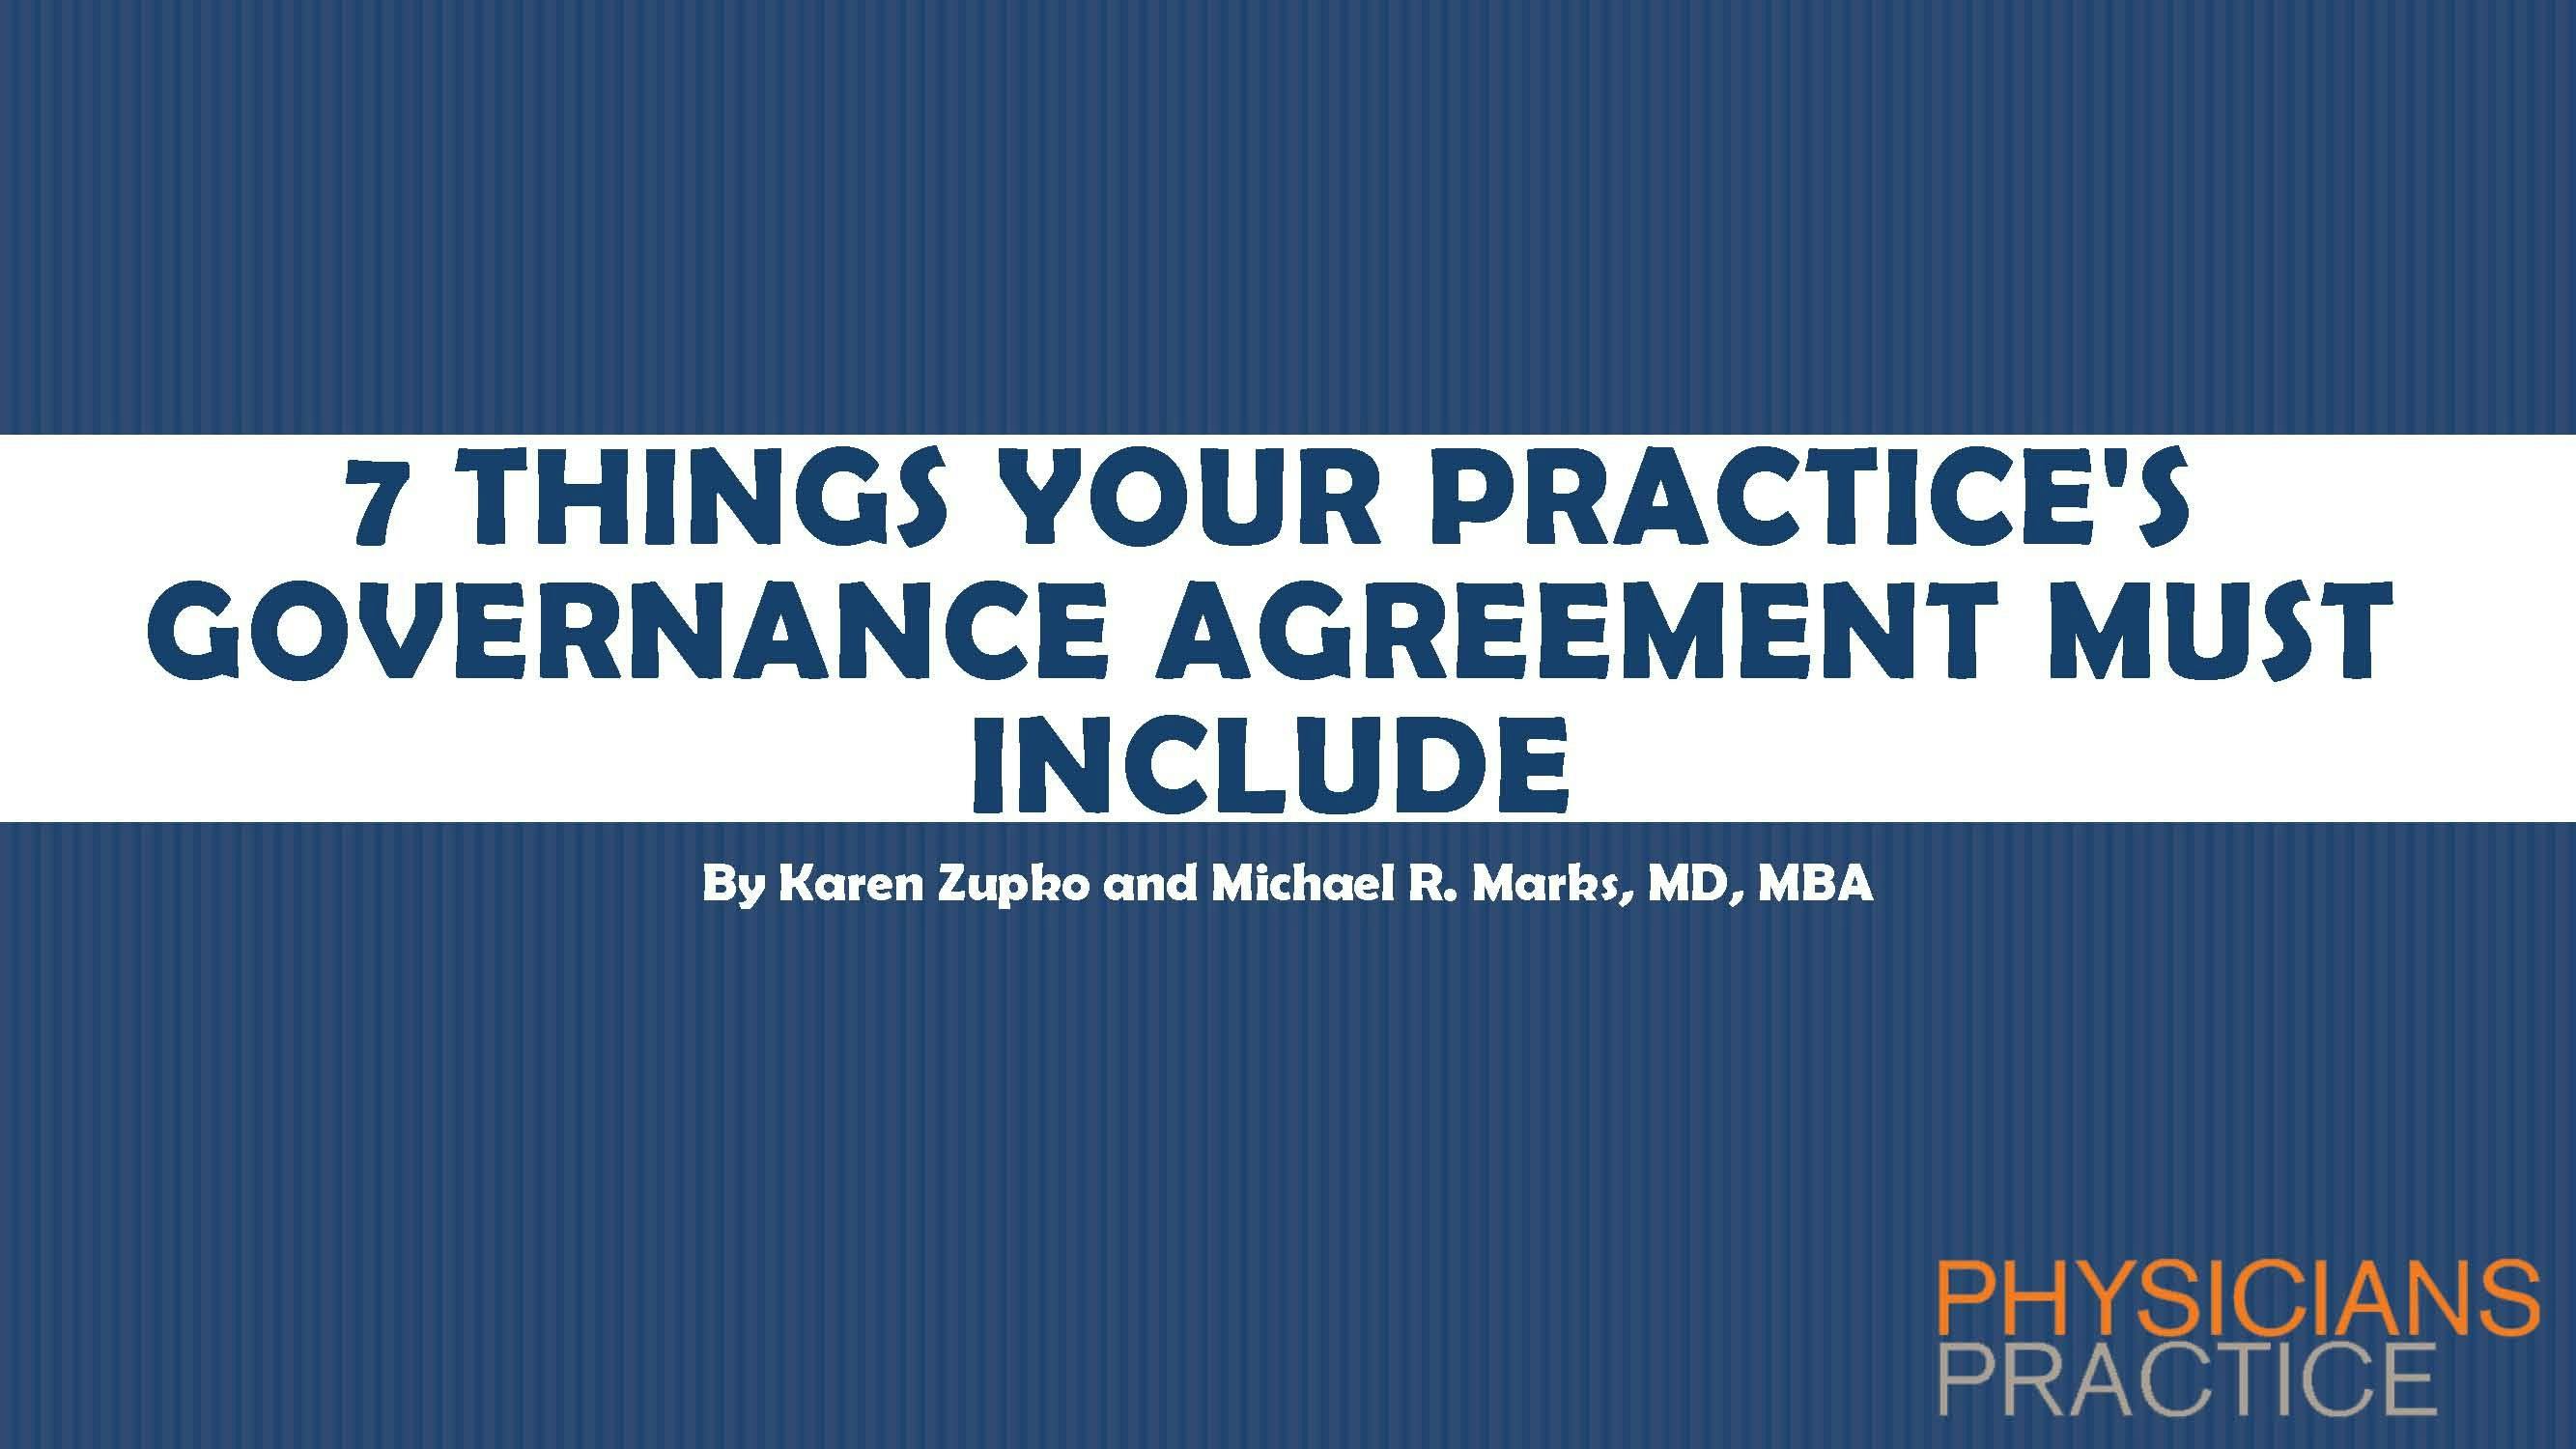 7 Things Your Practice's Governance Agreement Must Include